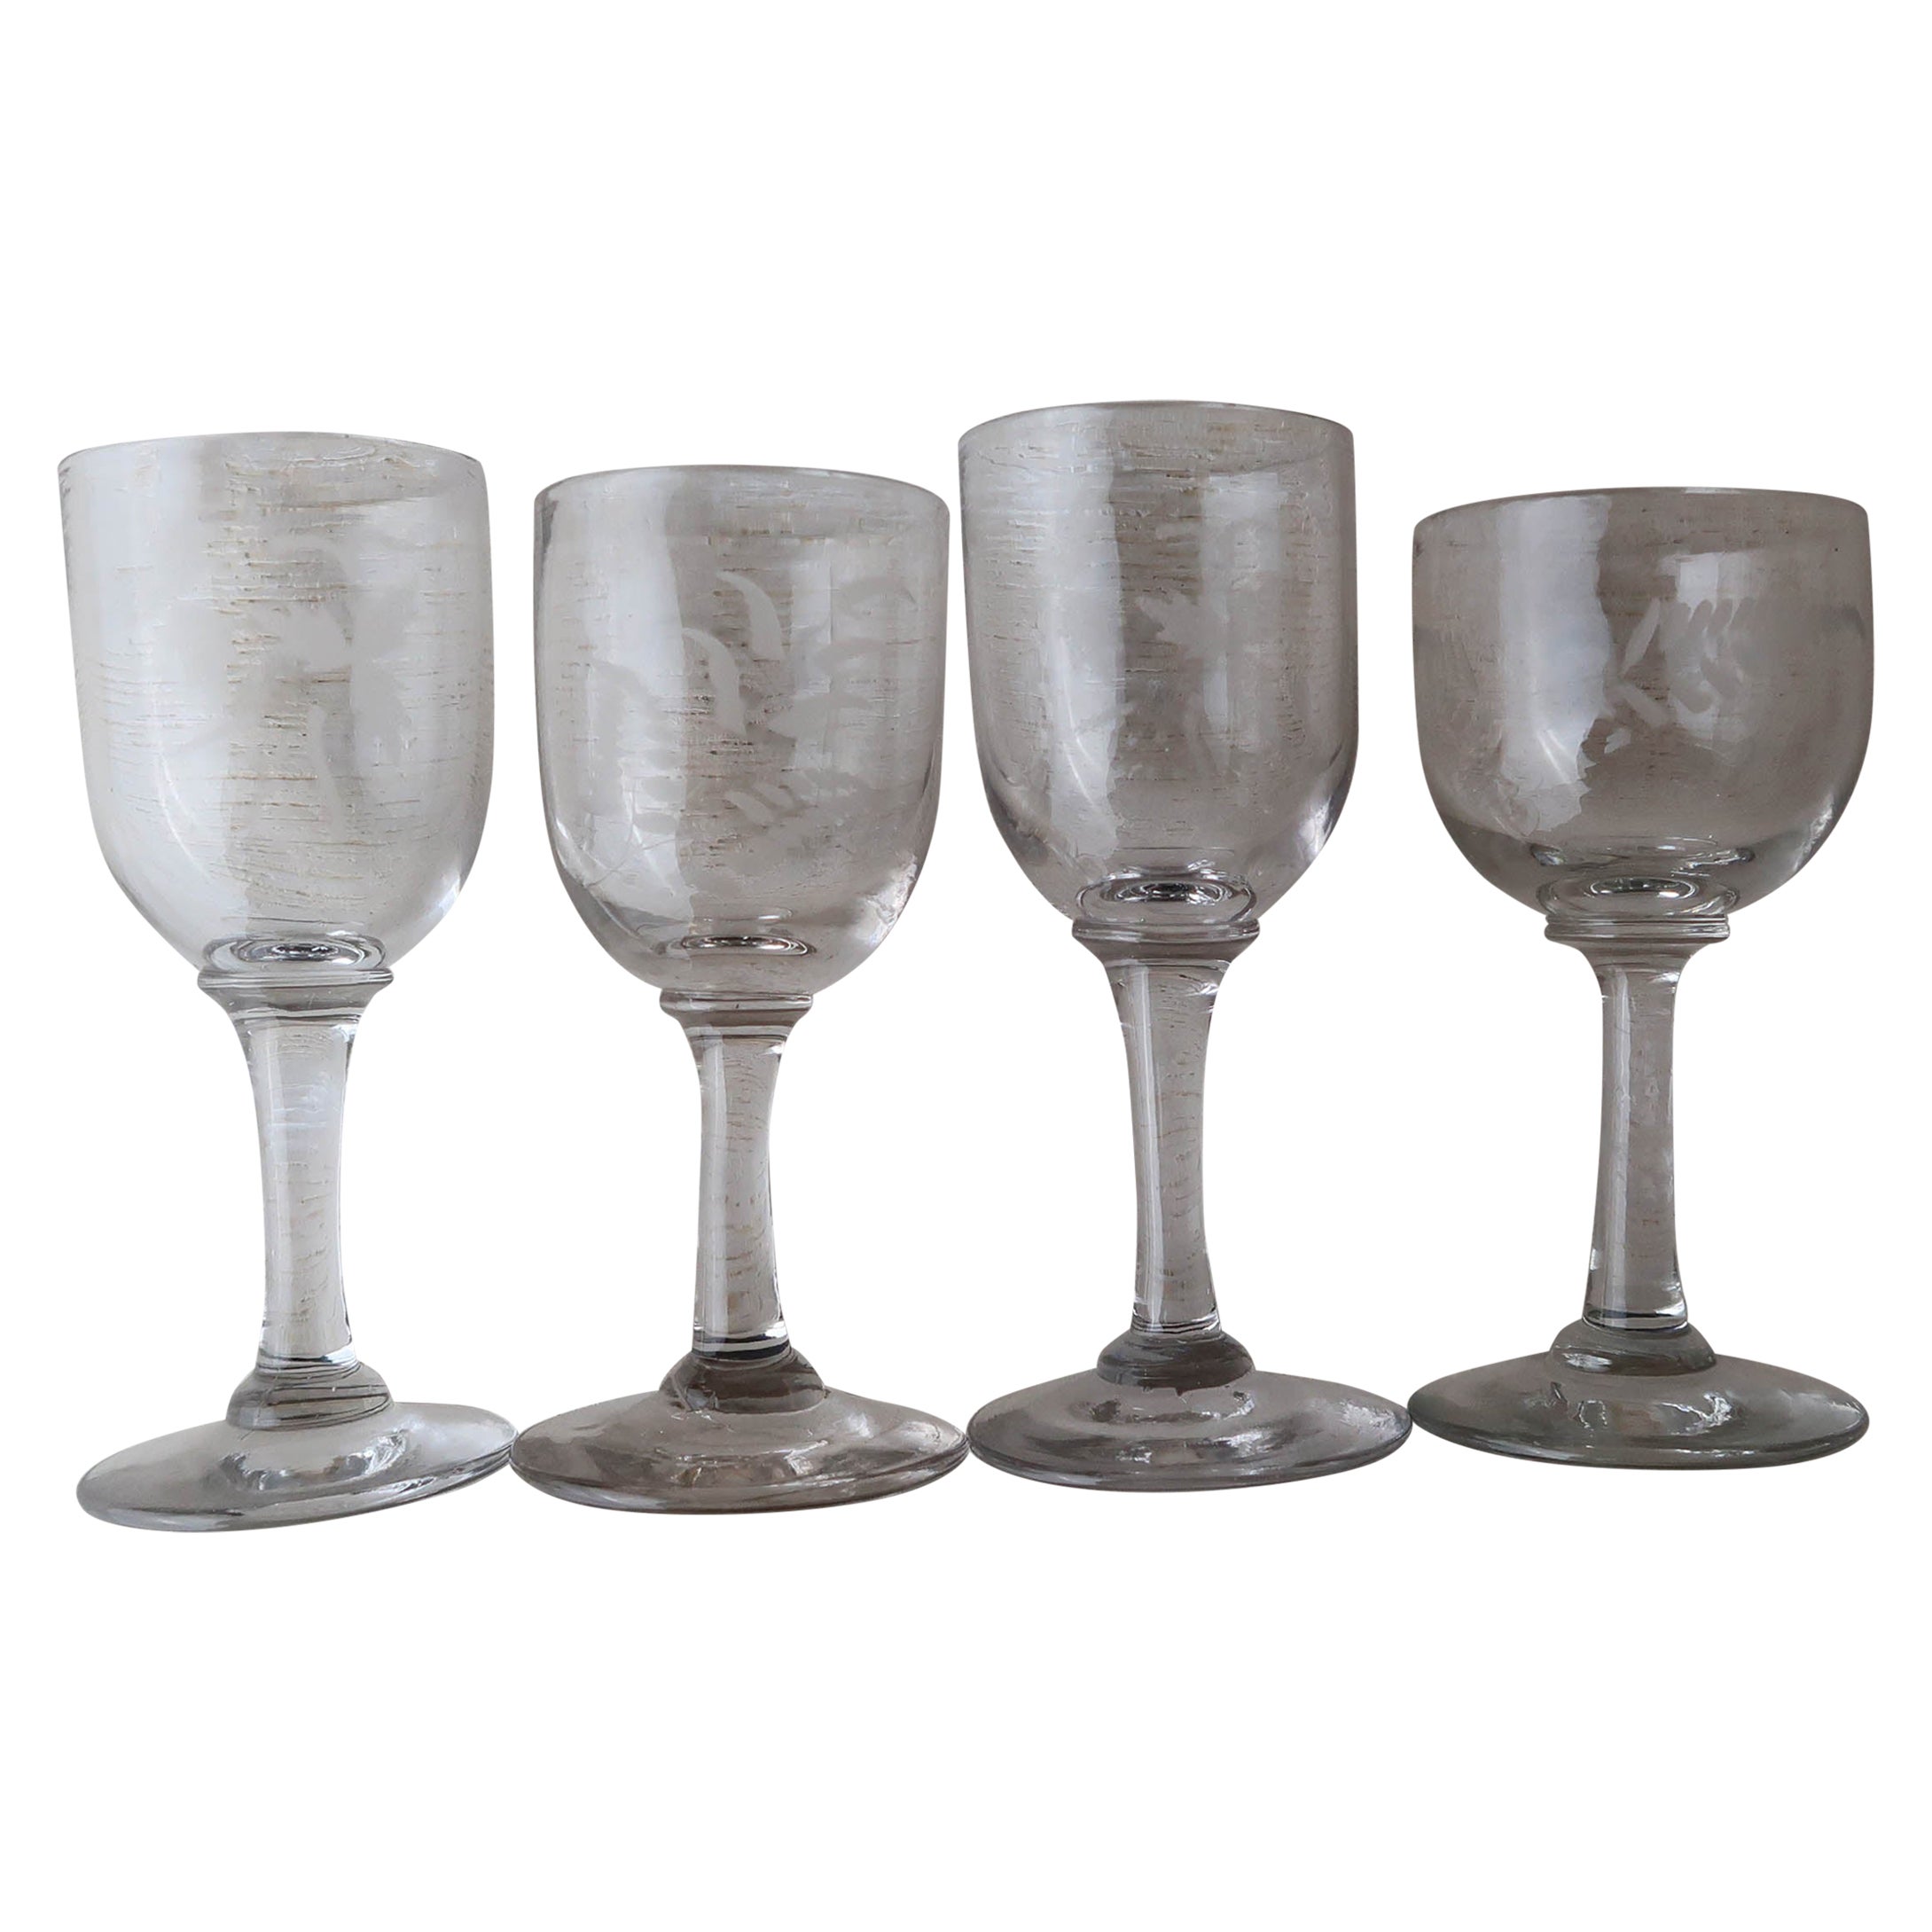 Collection of 4 small English 19th Century Etched Glasses